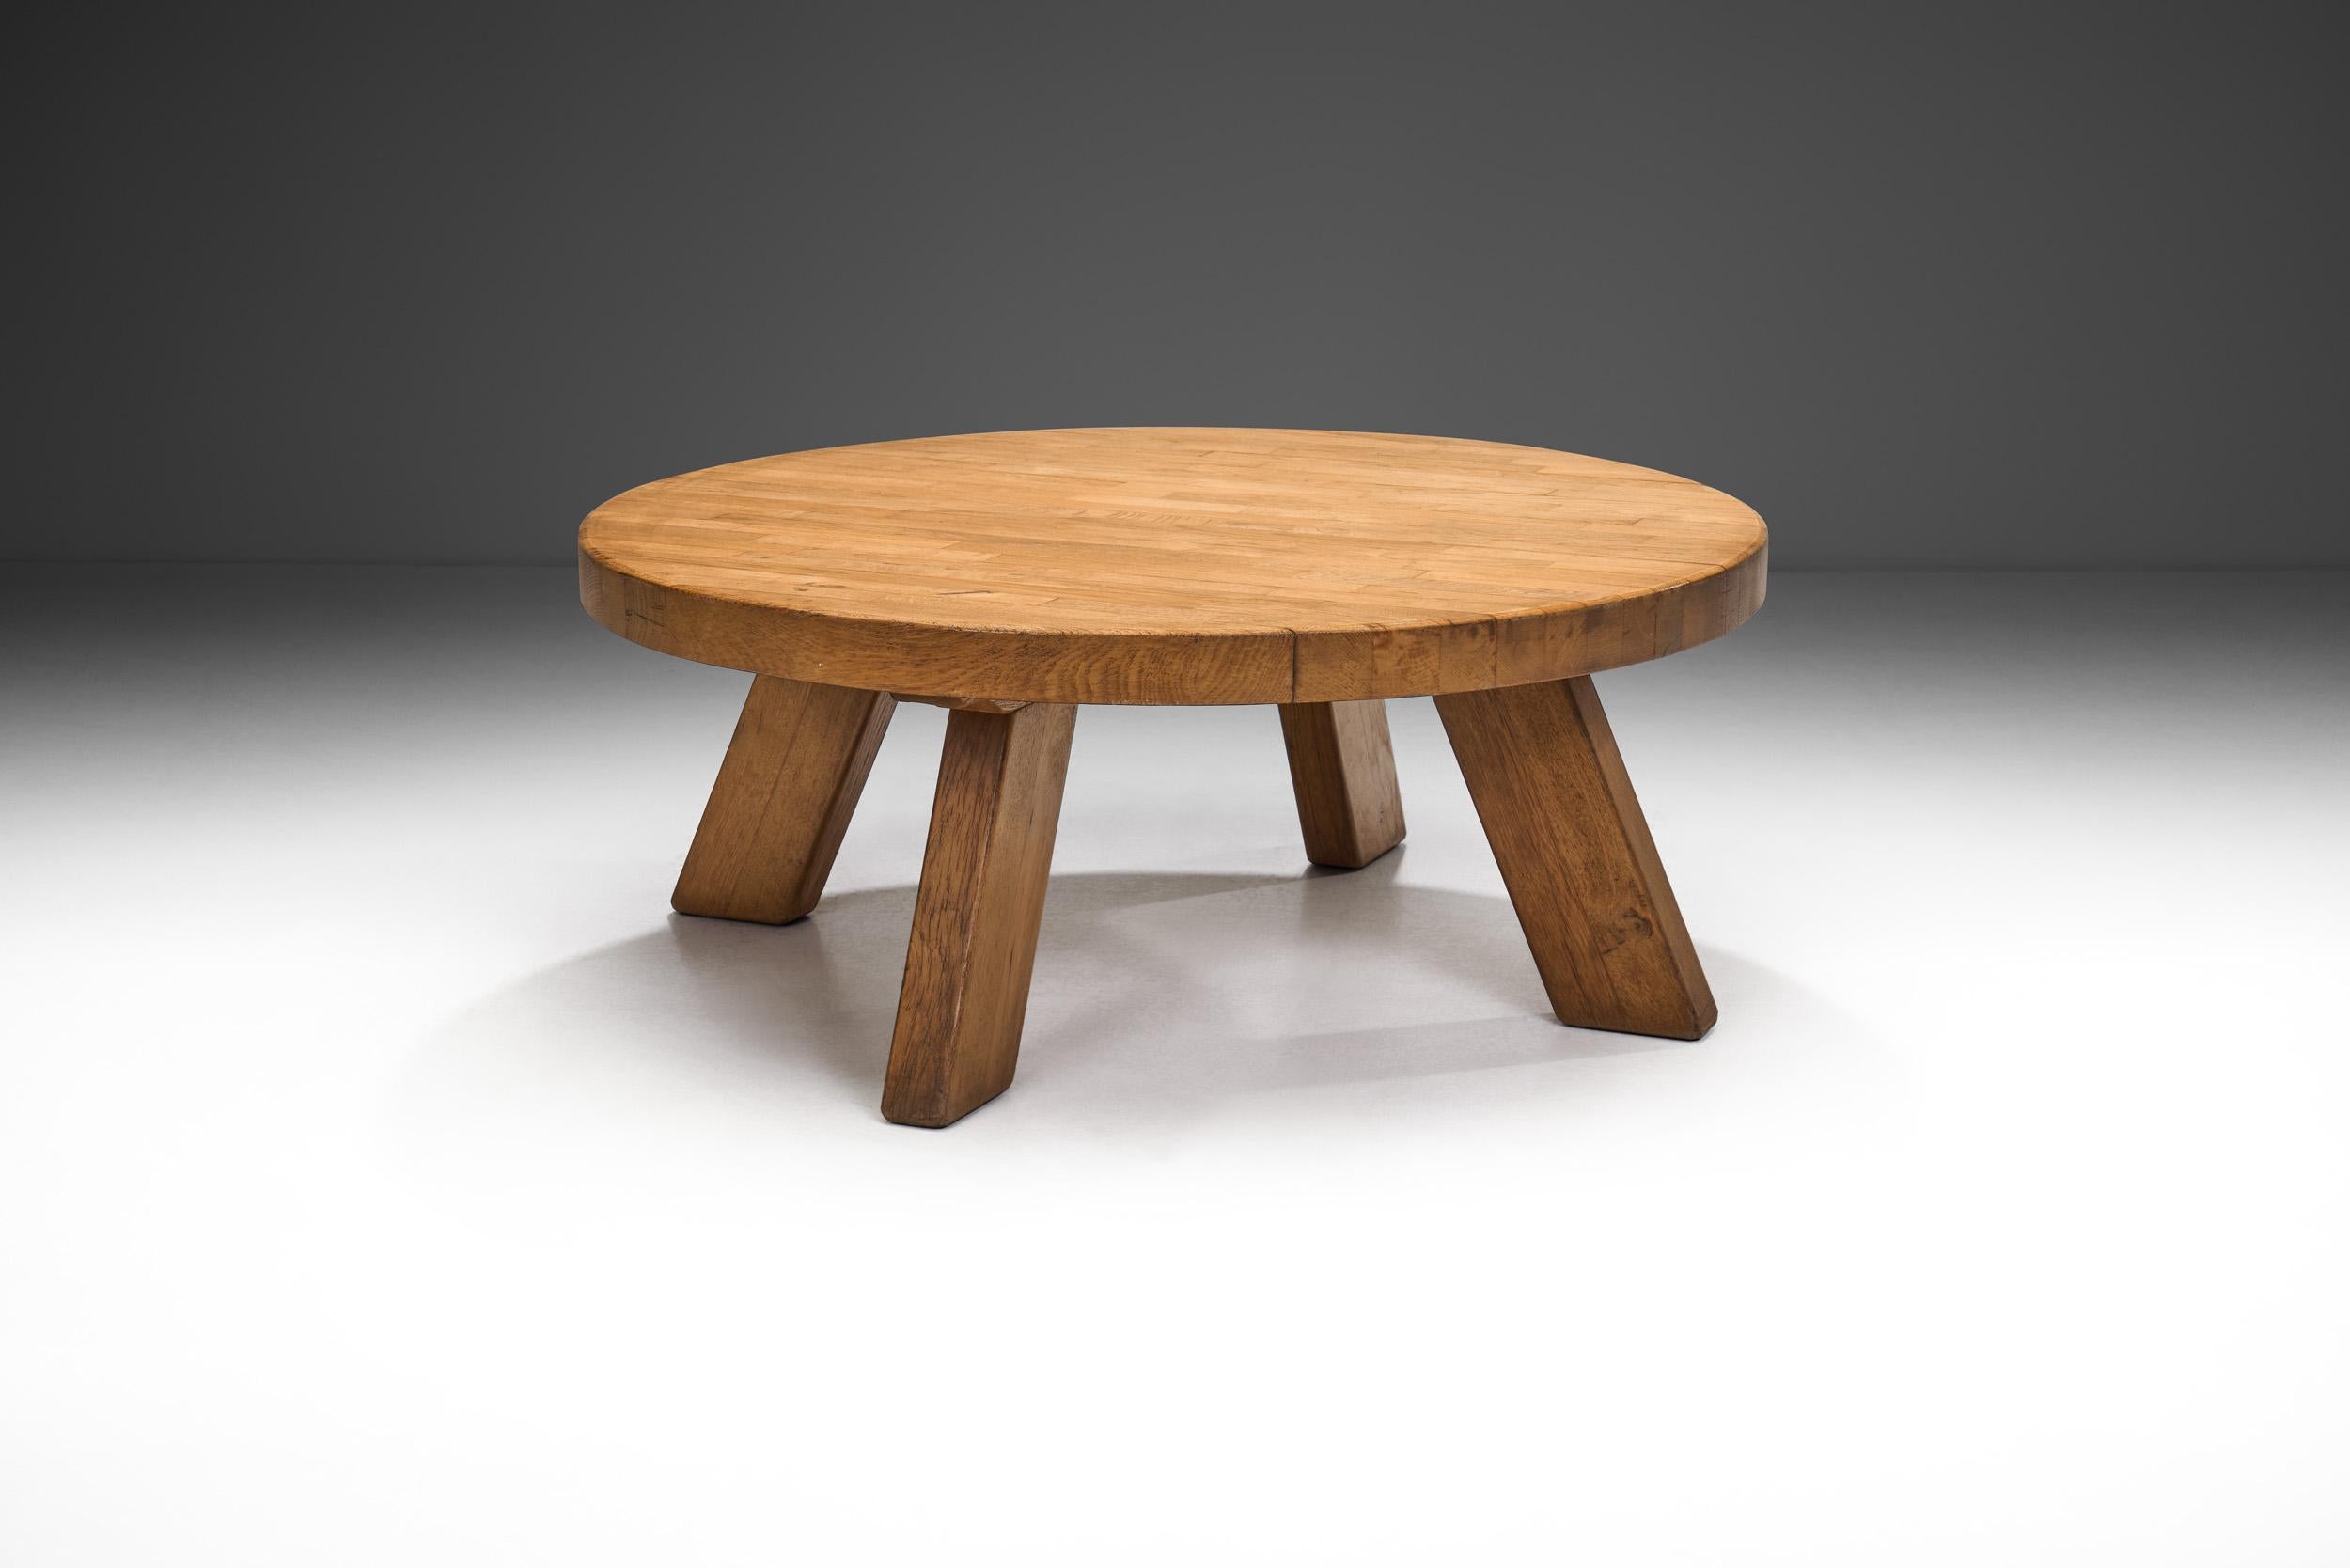 Dutch Solid Oak Round Brutalist Coffee Table, The Netherlands 1970s For Sale